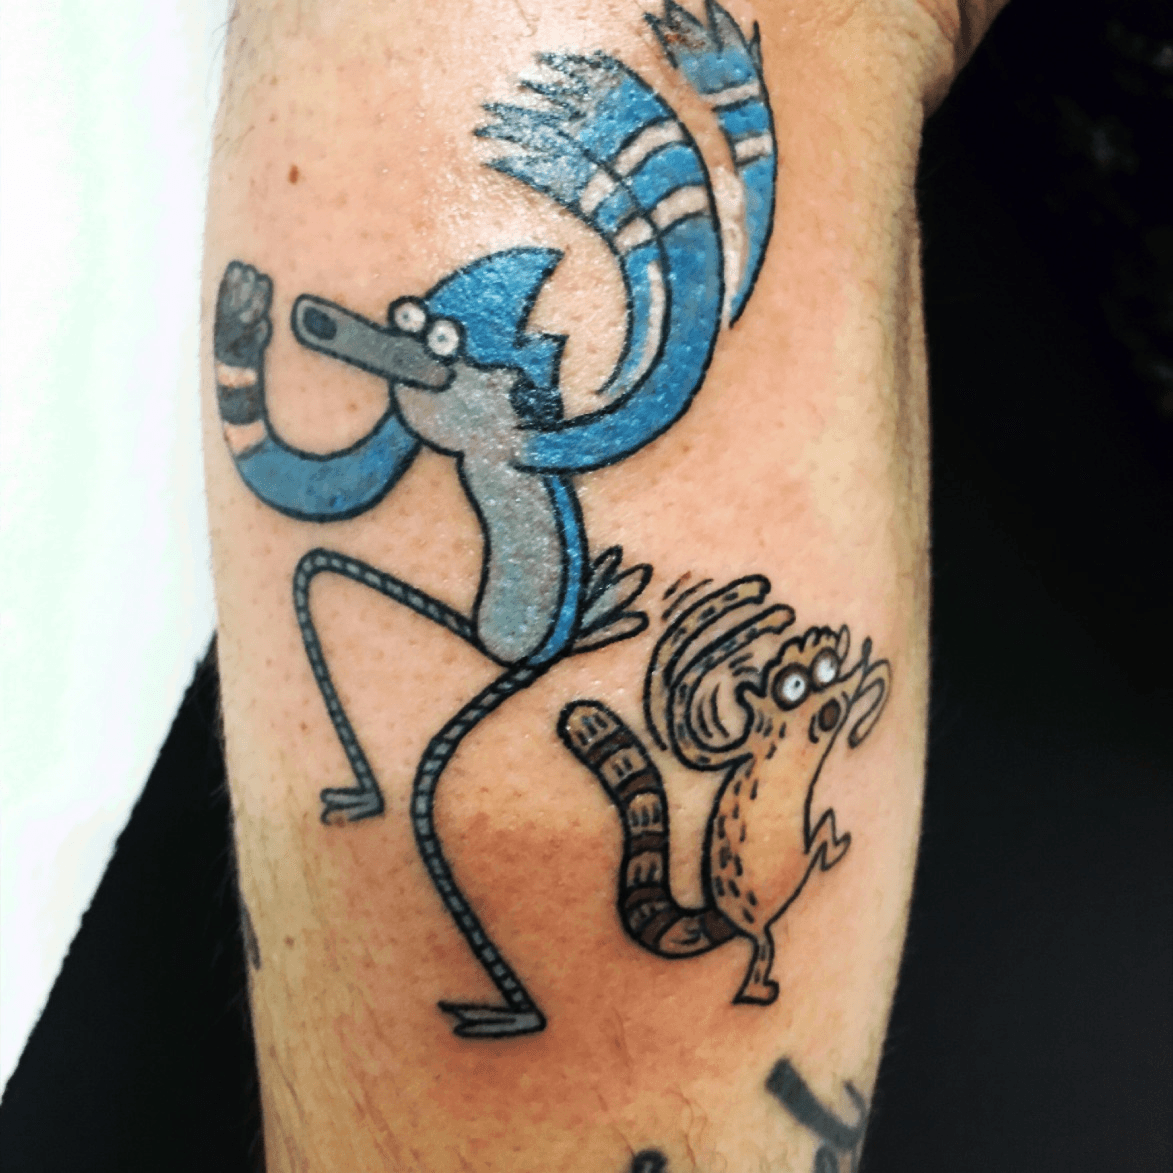 What If Mordecai Rigby Get Tattoos by pharrel3009 on DeviantArt